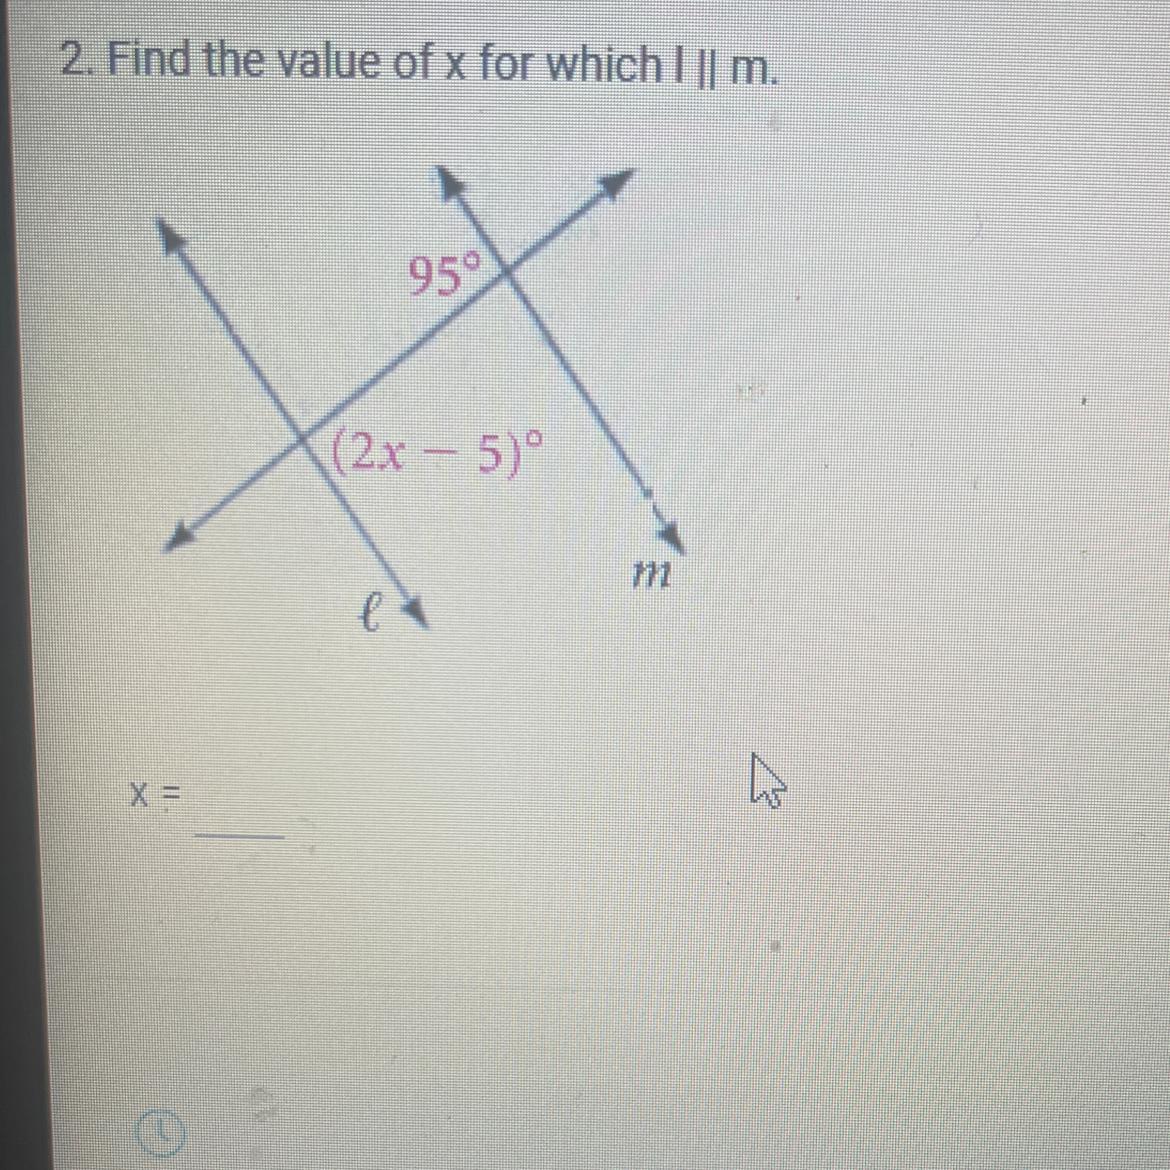 Find Thr Value Of X For Which 1 II M.